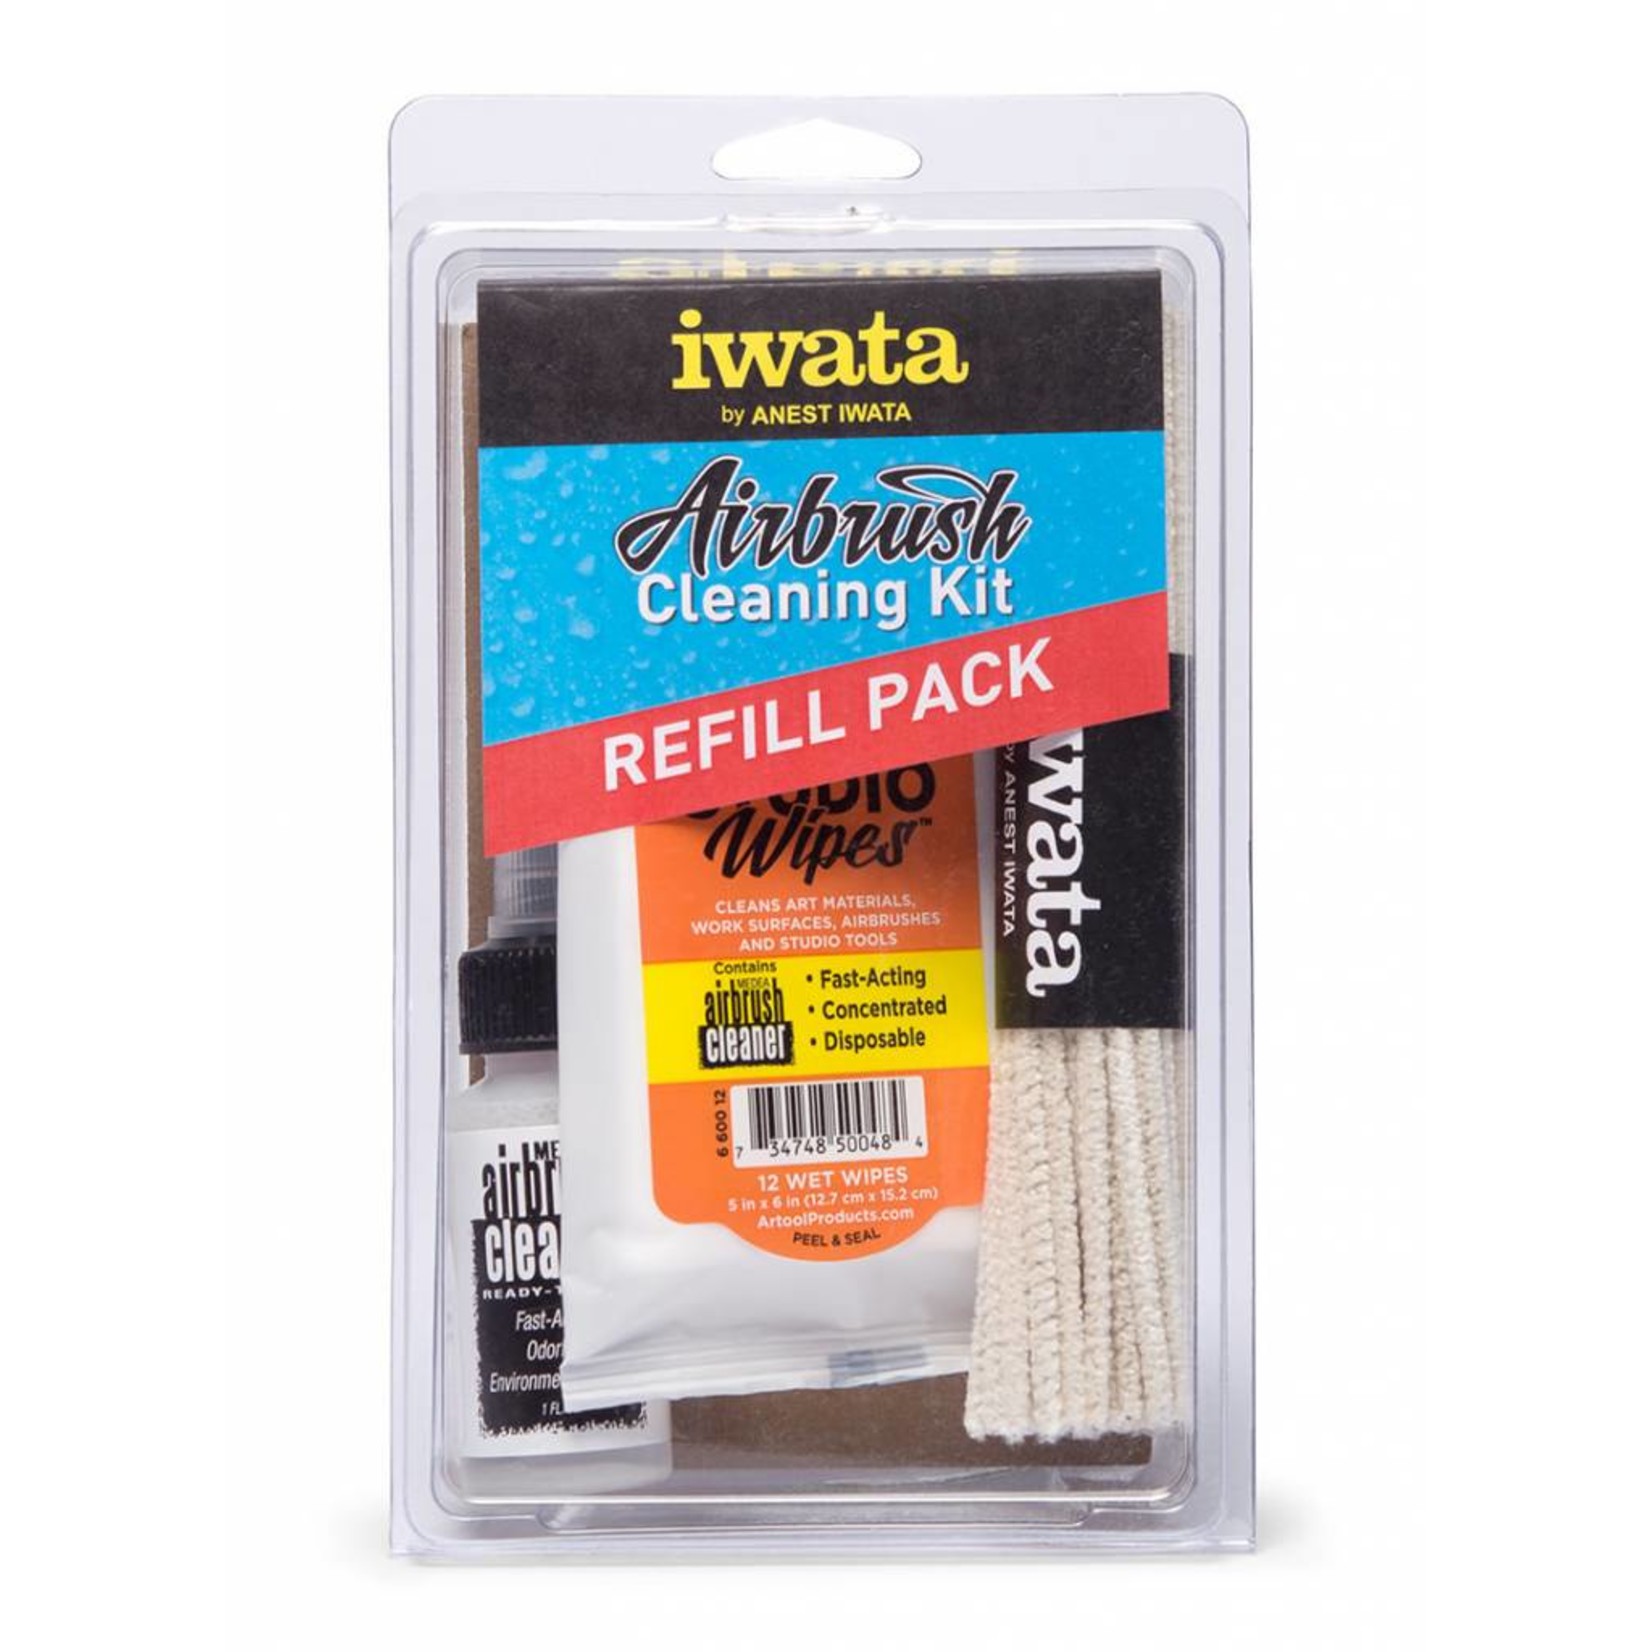 IWATA IWATA AIRBRUSH CLEANING KIT REFILL PACK      CL150